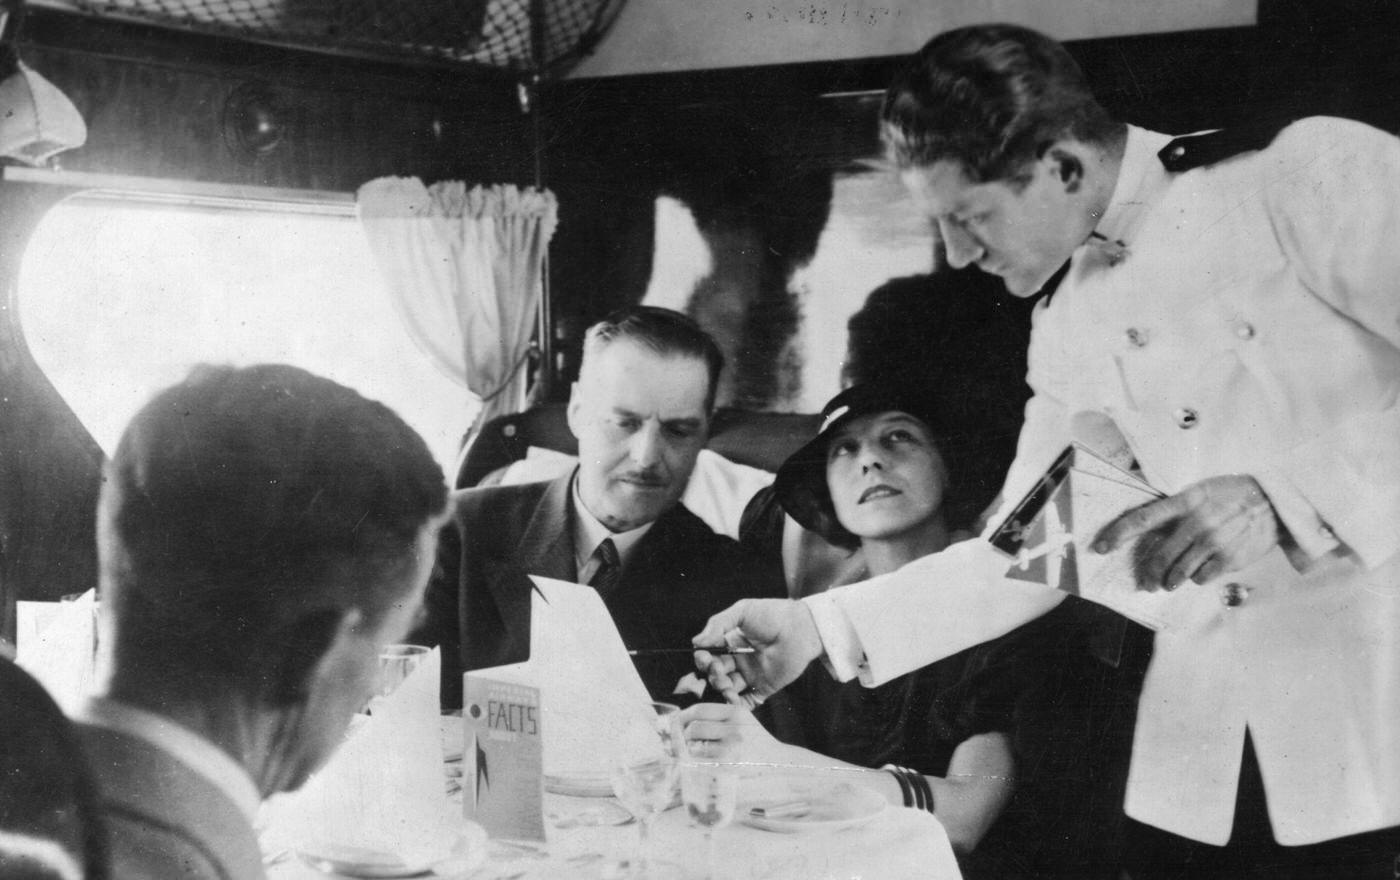 A waiter serves passengers aboard the Imperial Airways 'Scylla' flight from London to Paris.